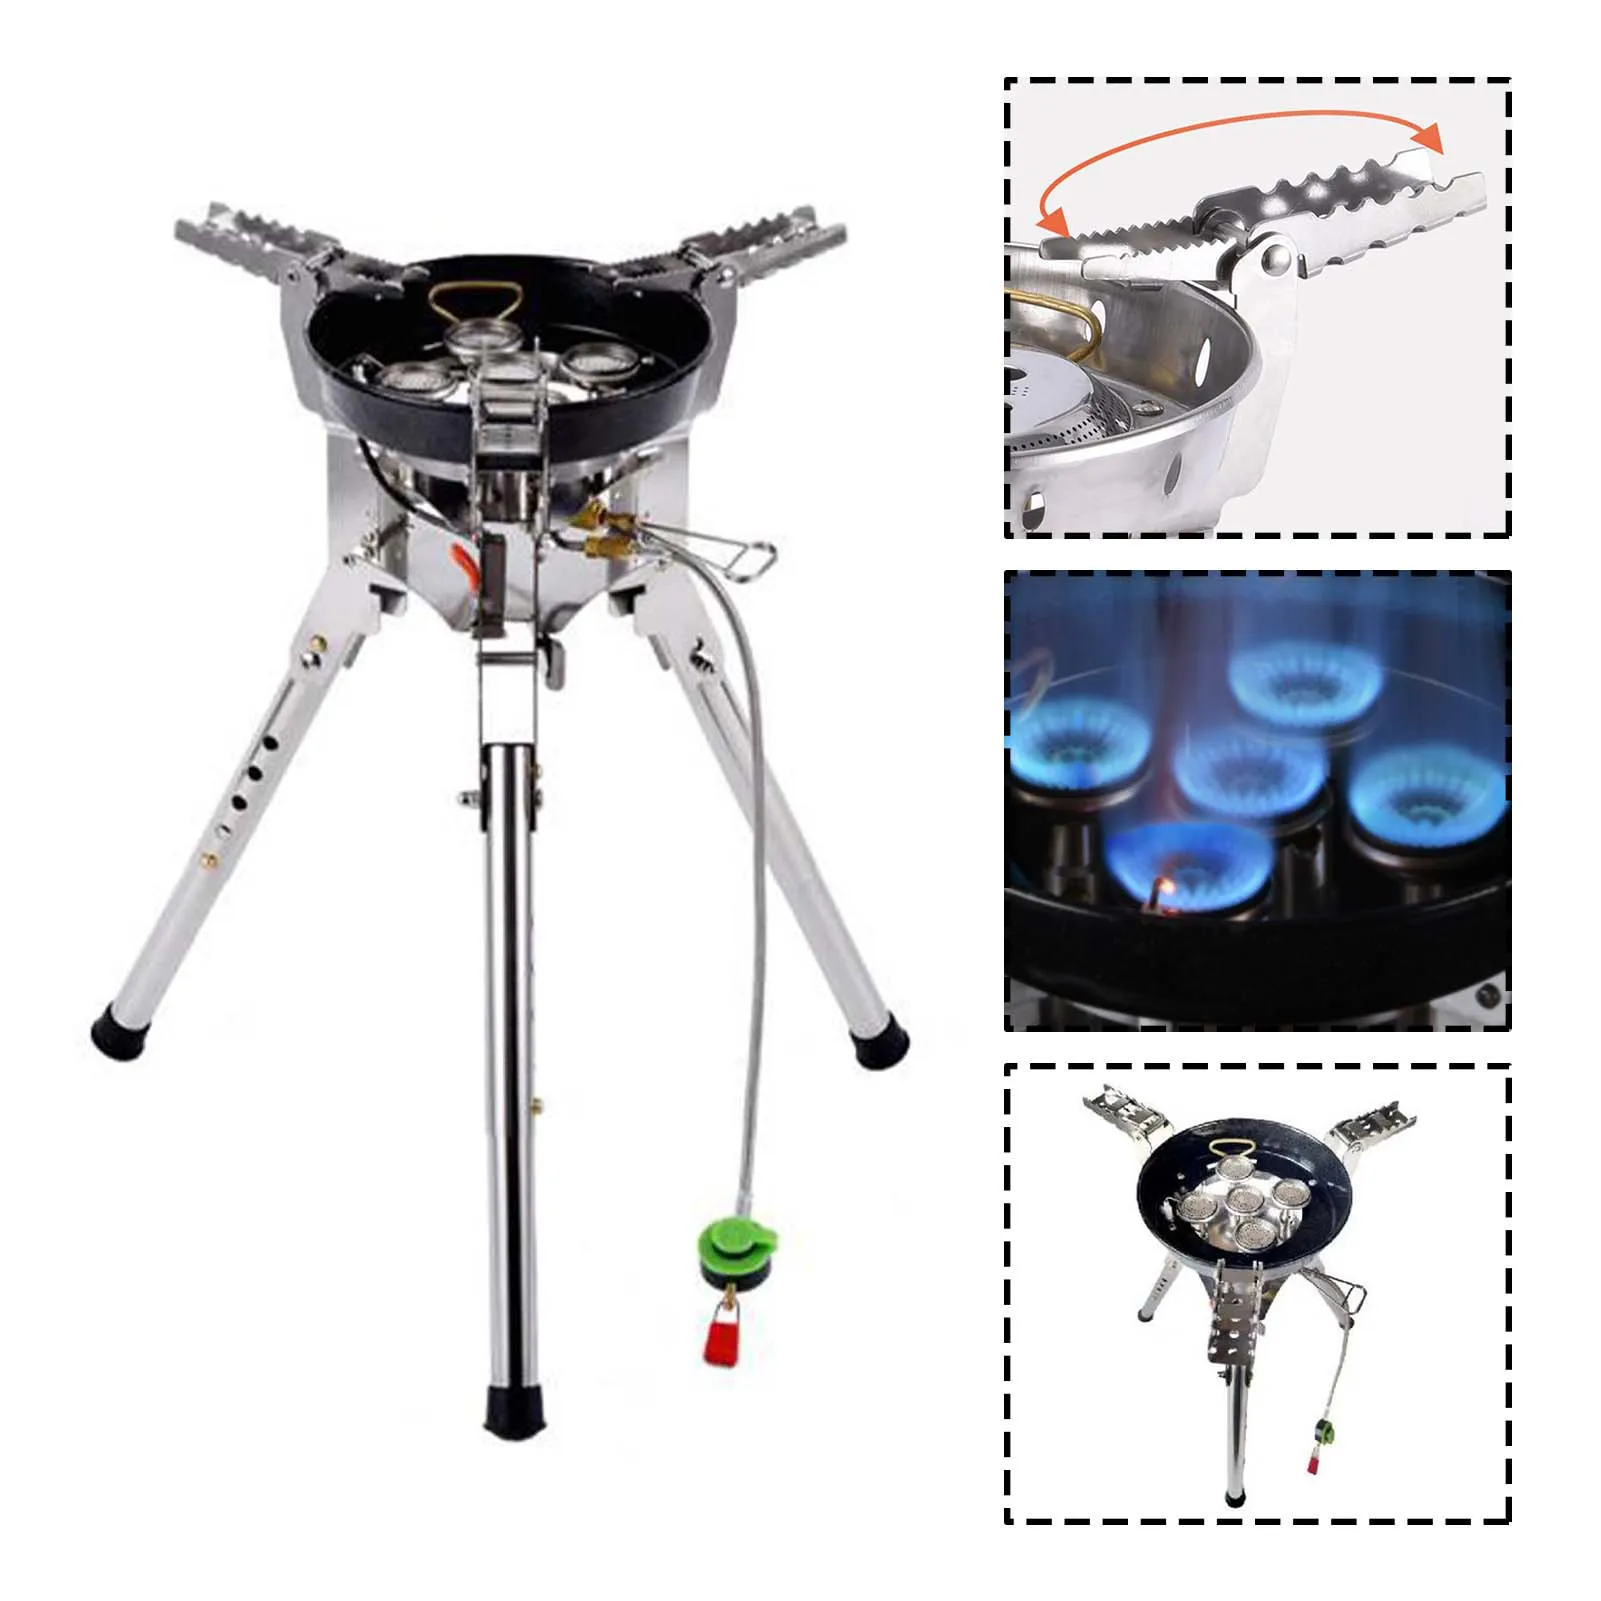 4360W/8400W Portable Camping Stove Outdoor Picnic High-power Windproof Gas Stove Integrated Lifting Fiery Stove for BRS 69 69A